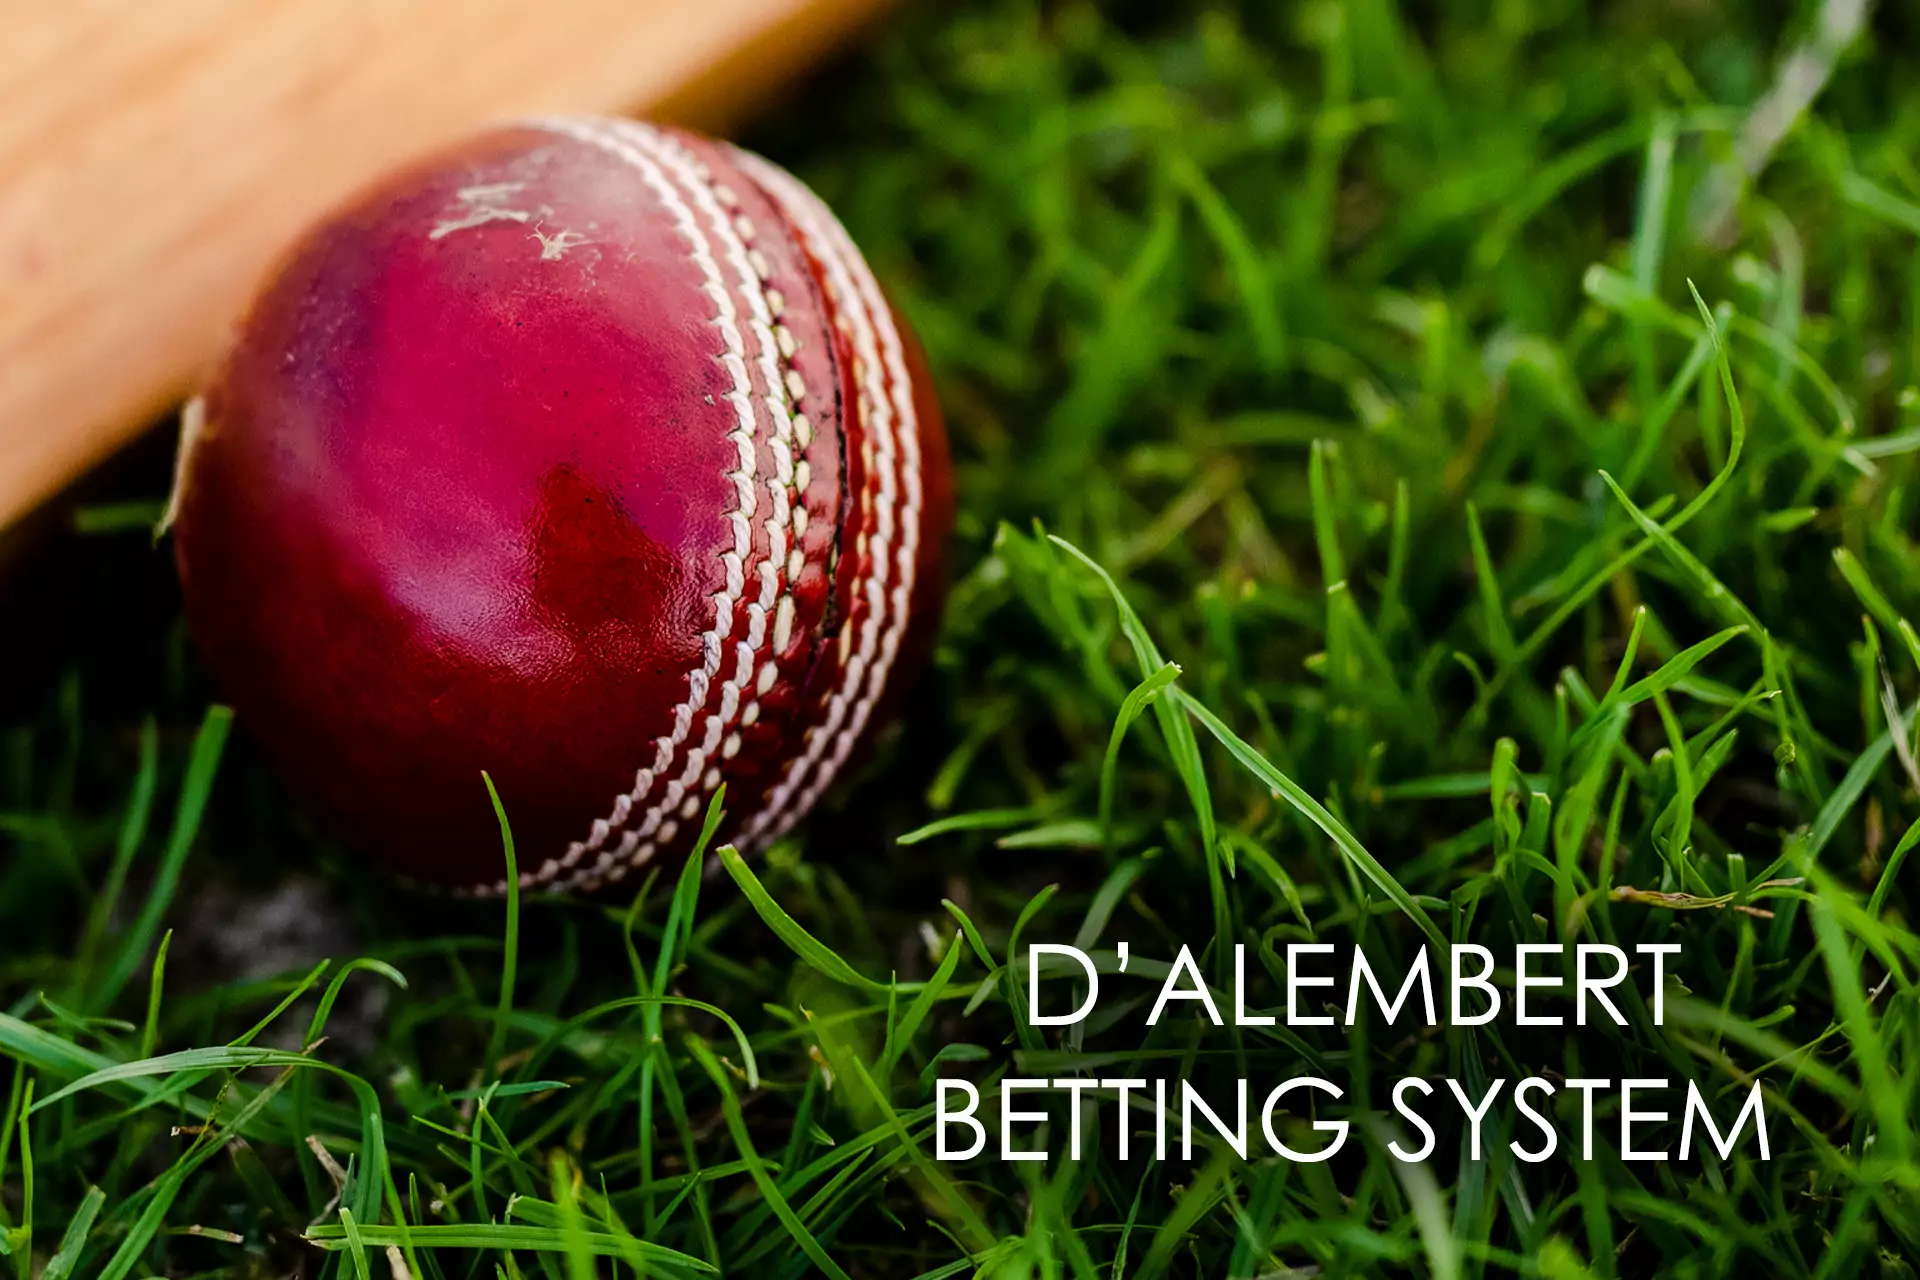 According to the principle of the d&#039;Alembert Betting System, if you win, you increase the bet by one unit.